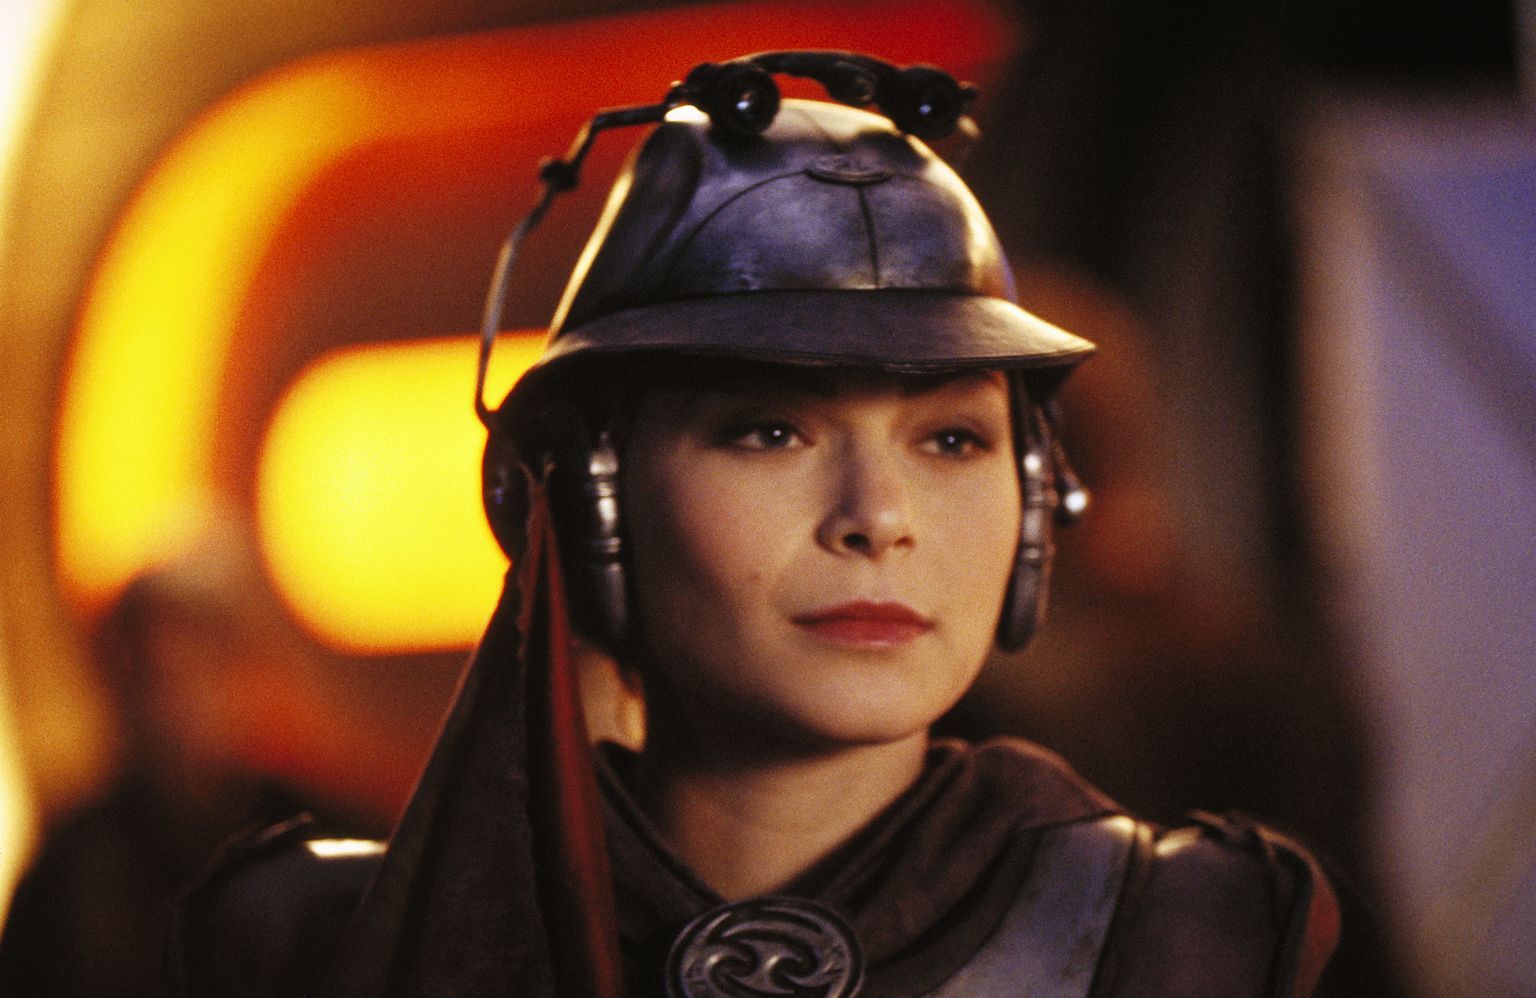 Who played Zam Wesell?